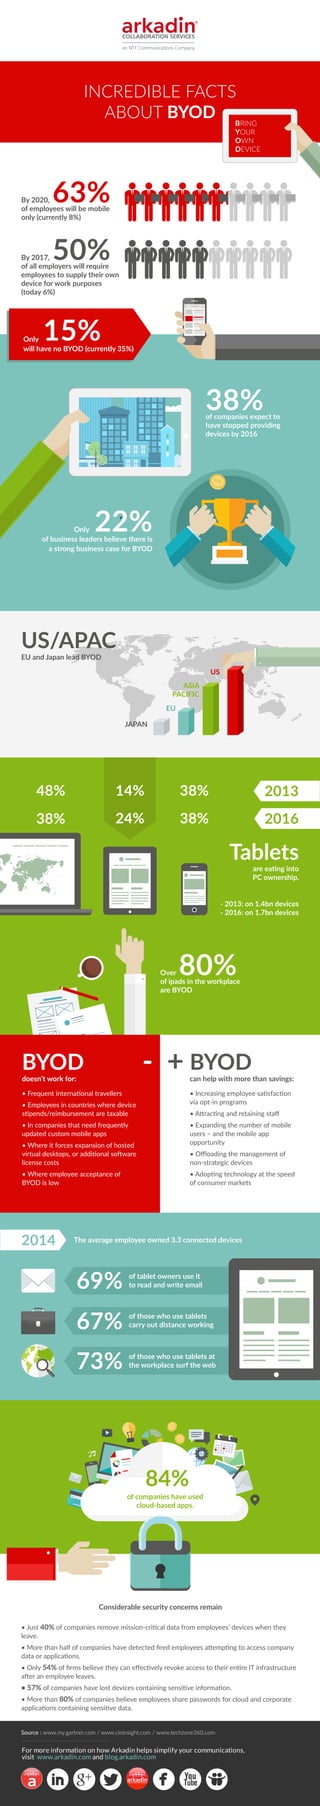 INCREDIBLE FACTS
ABOUT BYOD
31%
of employees
use a smartphone (68% use tablets,
79% laptops)
of IT
professionals have started
actively evaluating BYOD
50%
87%
iOS leads in mobile use with
but Android (69%) and Windows
(66%) aren’t far behind
76%
Over
of employees globally
currently use personal devices
for work purposes or expect to
do so in the future
25%of companies will
increase BYOD budgets
in 2015
US/APAC
- 2013: on 1.4bn devices
- 2016: on 1.7bn devices
Tablets
are eating into
PC ownership.
BYOD
doesn’t work for:
76%
41% 82%
of employees feel that
technology has had an
inﬂuence over the way
they work in the
past year
Having the latest/greatest technology is very important to:
of employees in
developed nations
in emerging
markets
• Frequent international travellers
• Employees in countries where device
stipends/reimbursement are taxable
• In companies that need frequently
updated custom mobile apps
• Where it forces expansion of hosted
virtual desktops, or additional software
license costs
• Where employee acceptance of
BYOD is low
BYOD
can help with more than savings:
• Increasing employee satisfaction
via opt-in programs
• Attracting and retaining staﬀ
• Expanding the number of mobile
users – and the mobile app
opportunity
• Oﬄoading the management of
non-strategic devices
• Adopting technology at the speed
of consumer markets
BRING
YOUR
OWN
DEVICE
- +
Considerable security concerns remain
84%
of companies have used
cloud-based apps.
• Just 40% of companies remove mission-critical data from employees’ devices when they
leave.
• More than half of companies have detected ﬁred employees attempting to access company
data or applications.
• Only 54% of ﬁrms believe they can eﬀectively revoke access to their entire IT infrastructure
after an employee leaves.
• 57% of companies have lost devices containing sensitive information.
• More than 80% of companies believe employees share passwords for cloud and corporate
applications containing sensitive data.
The average employee owned 3.3 connected devices2014
69% of tablet owners use it
to read and write email
67% of those who use tablets
carry out distance working
73% of those who use tablets at
the workplace surf the web
Source : www.cioinsight.com / www.techzone360.com / www.dell.com / www.channelinsider.com / i.dell.com
BYOD is rising around the world, but there are hotspots:
US, China, UAE and Australia lead, France, UK
and Germany trail
+ 25%
 